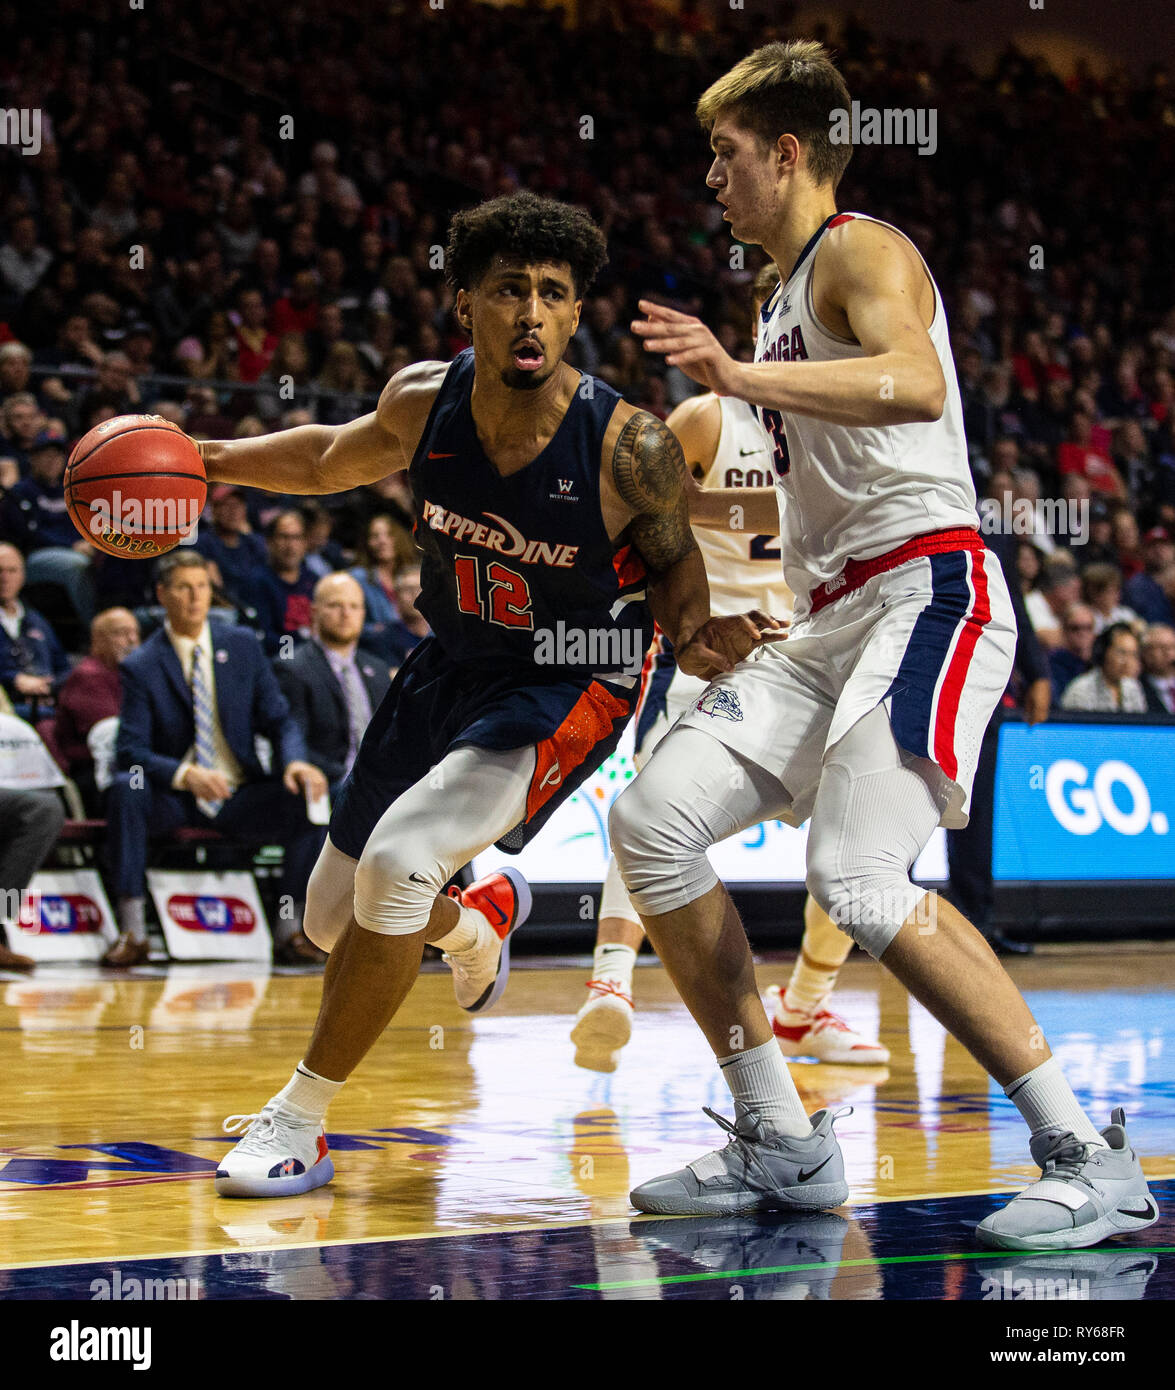 Mar 11 2019 Las Vegas, NV, U.S.A. Pepperdine forward Darnell Dunn (12) drives to the basket during the NCAA West Coast Conference Men's Basketball Tournament semi -final between the Pepperdine Wave and the Gonzaga Bulldogs 74-100 lost at Orleans Arena Las Vegas, NV. Thurman James/CSM Stock Photo